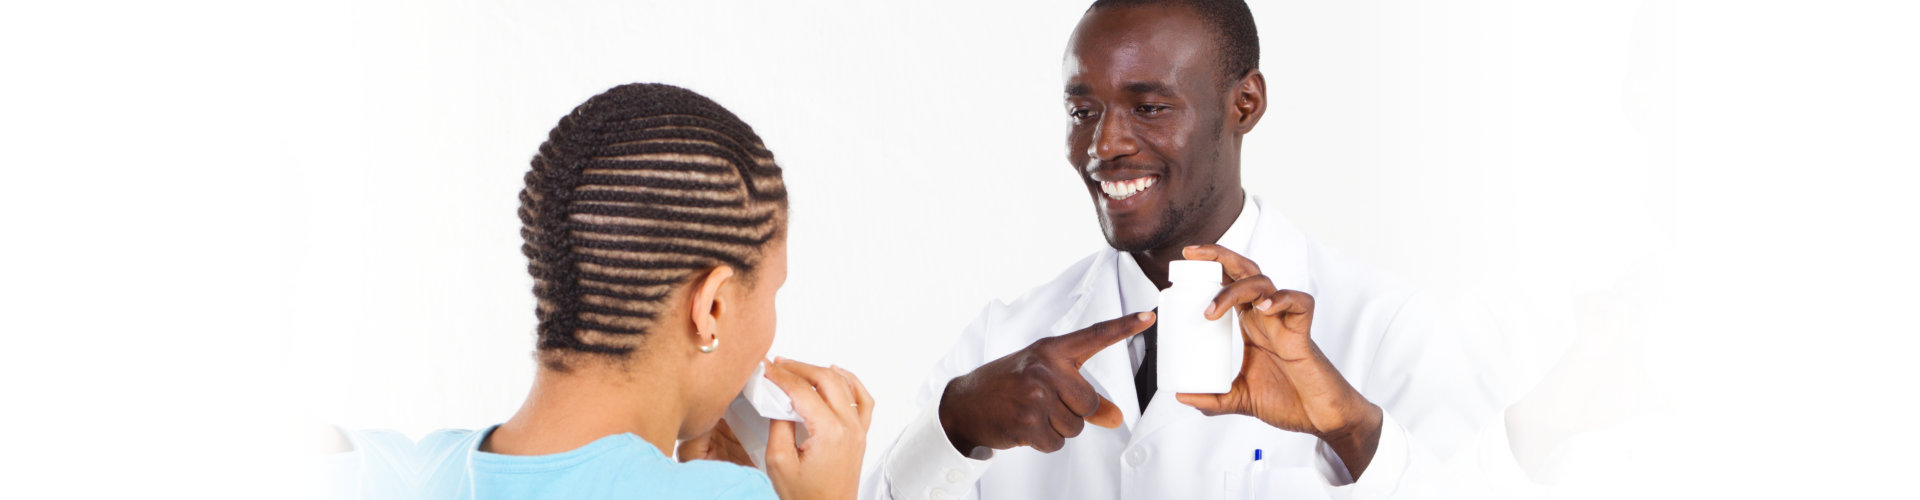 male pharmacist pointing at a bottle of medicine